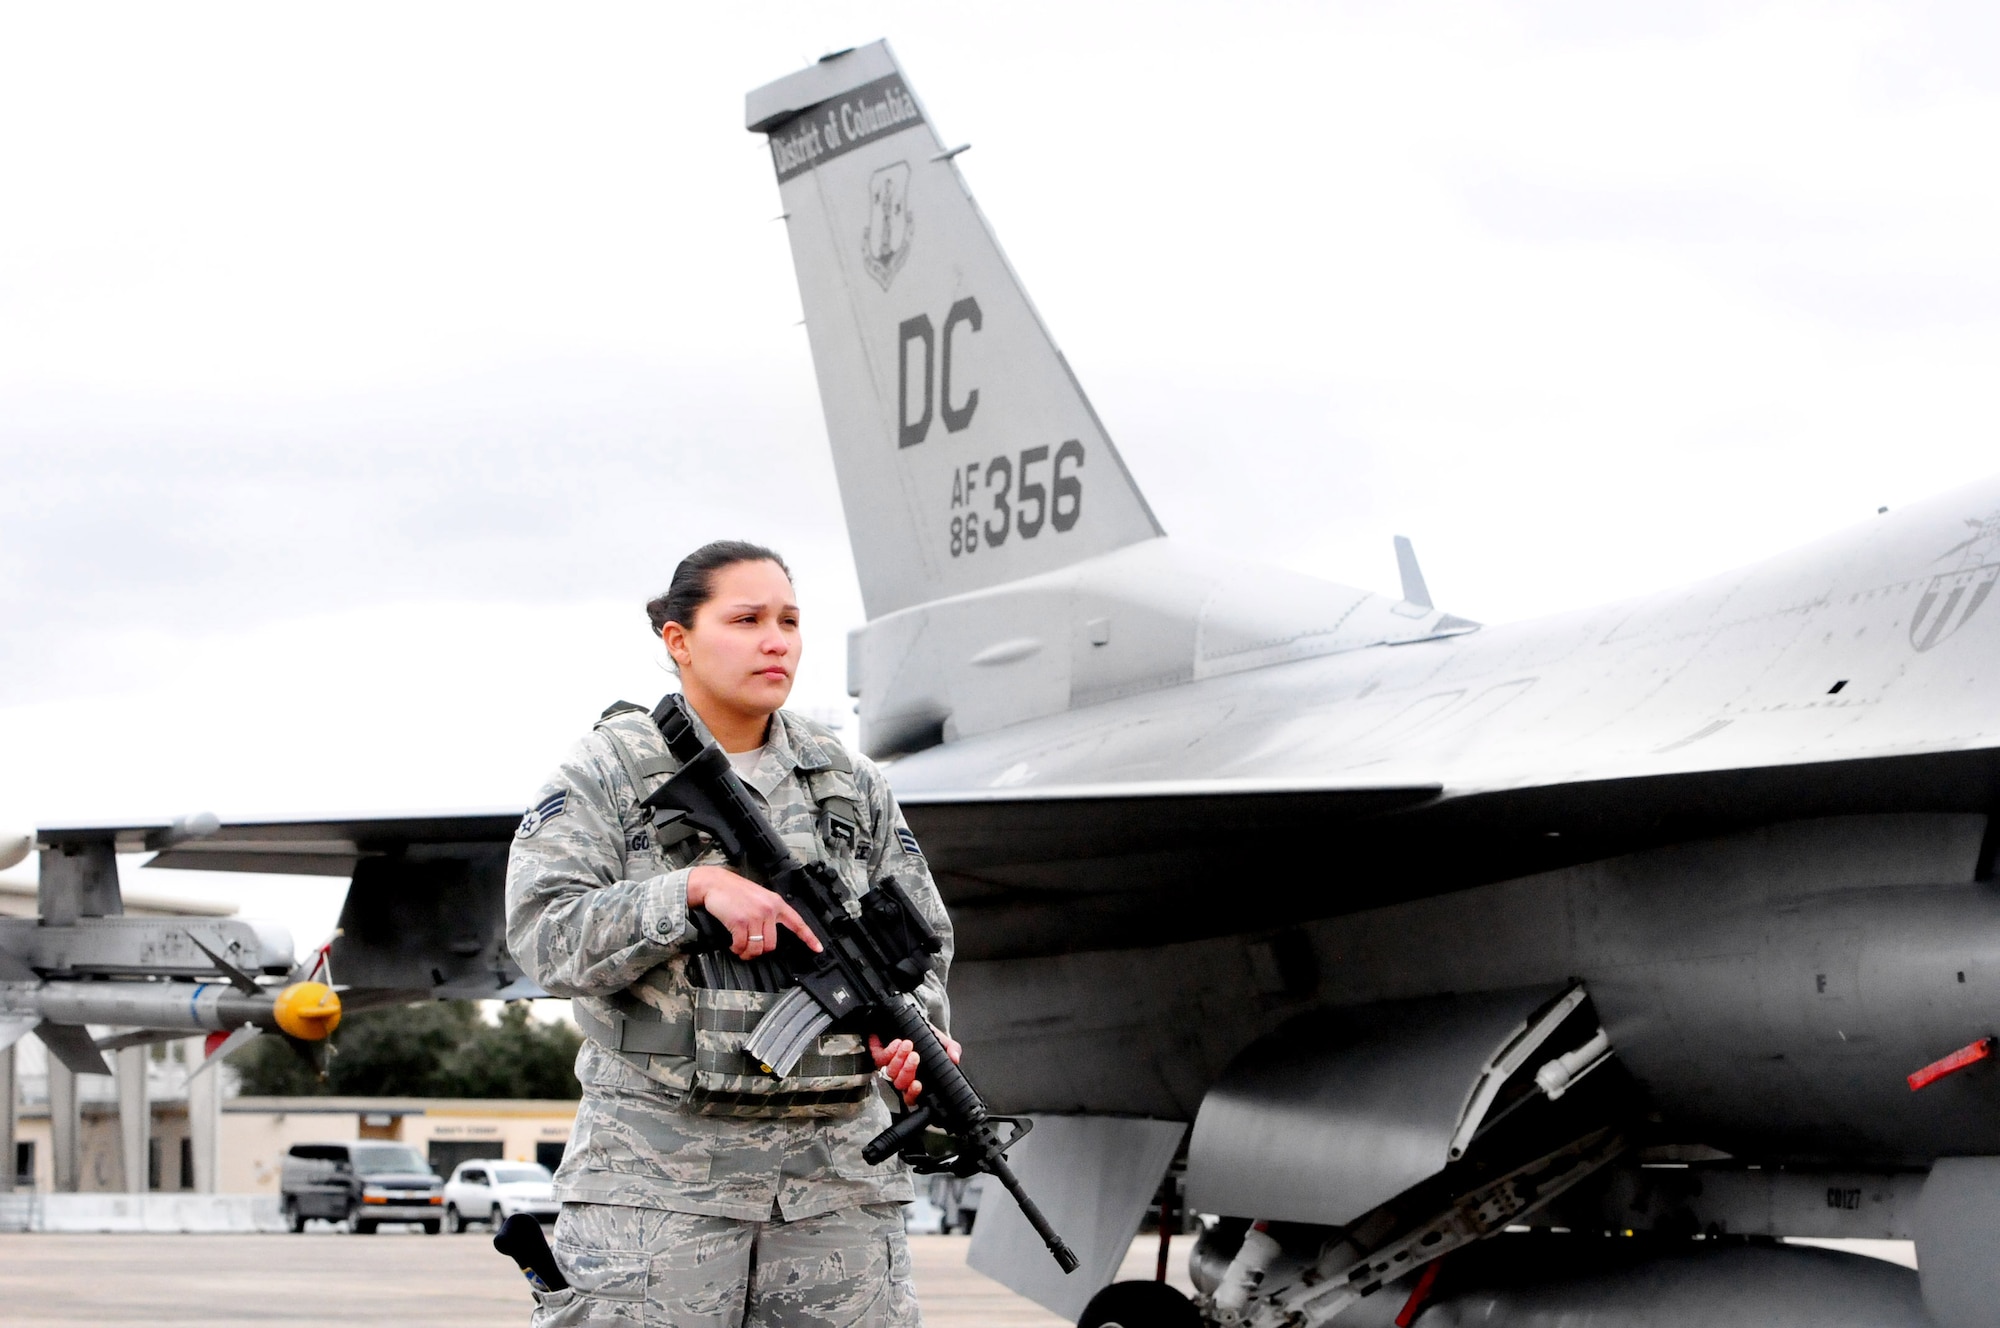 113th Wing security forces specialist Senior Airman Erica Gonzalez patrols the flight line on Naval Air Station Joint Reserve Base, New Orleans during Exercise Sentry Voodoo 2016. Gonzalez is a D.C. Air National Guardsman participating in the two-week flying exercise. (Air National Guard photo by Master Sgt. Craig Clapper/Released)